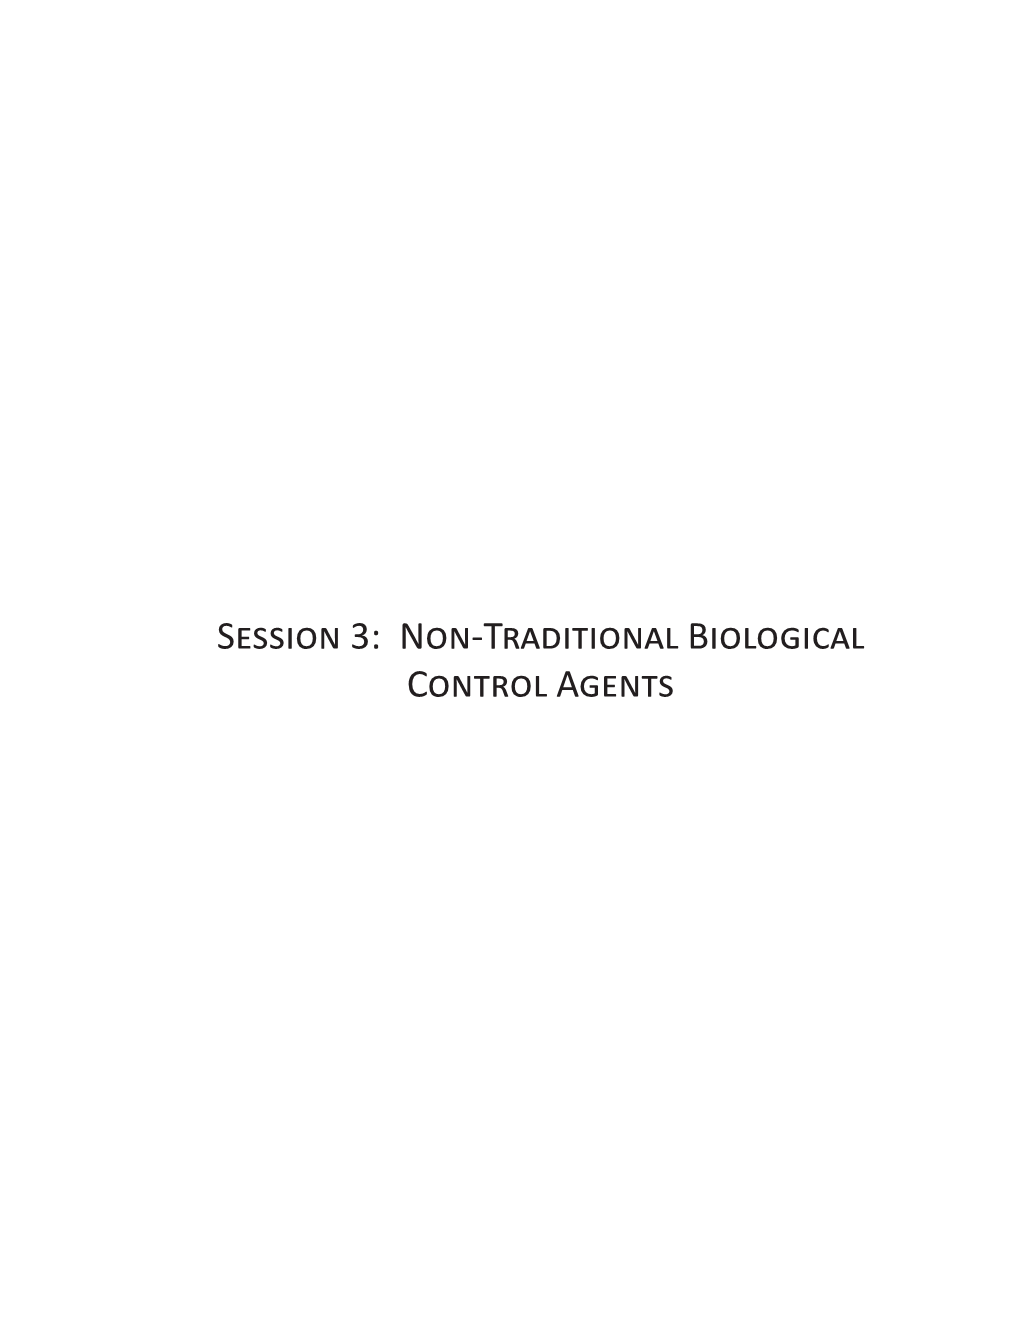 Session 3: Non-Traditional Biological Control Agents 102 Session 3 Non-Traditional Biological Control Agents